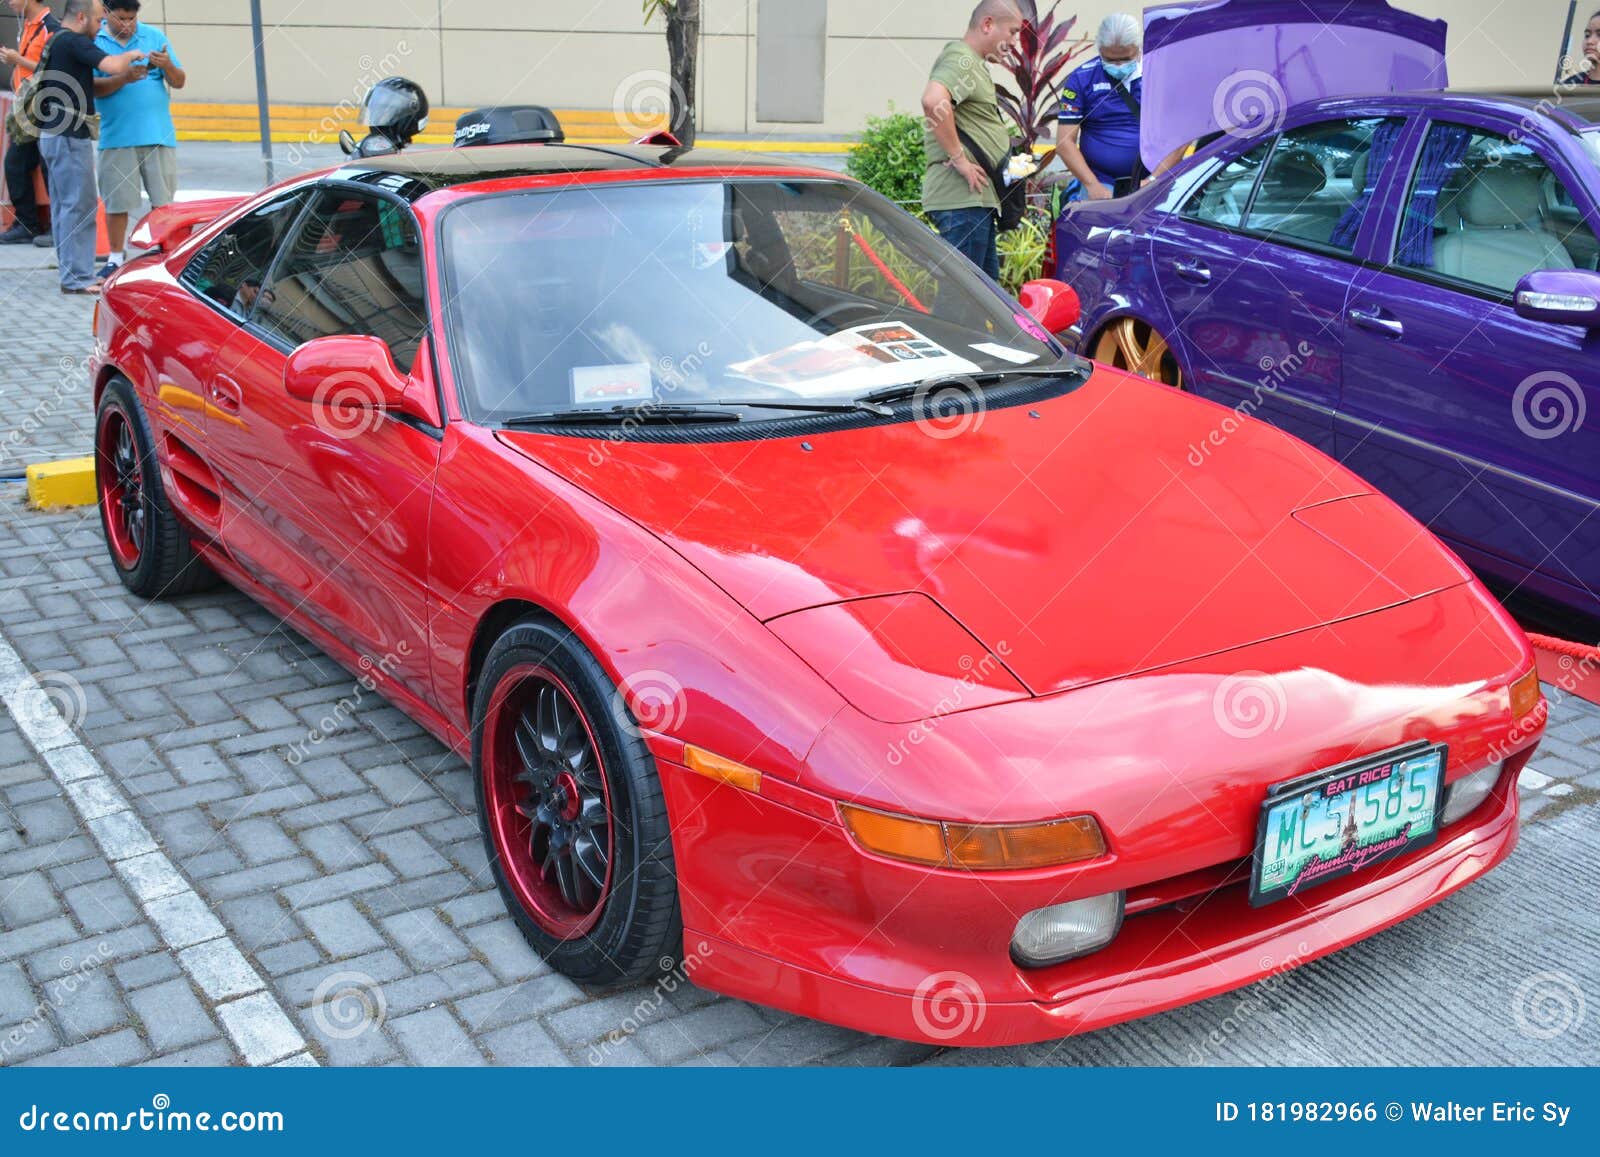 Toyota Mr2 Sw Gts In Quezon City Philippines Editorial Photo Image Of Expo Transport